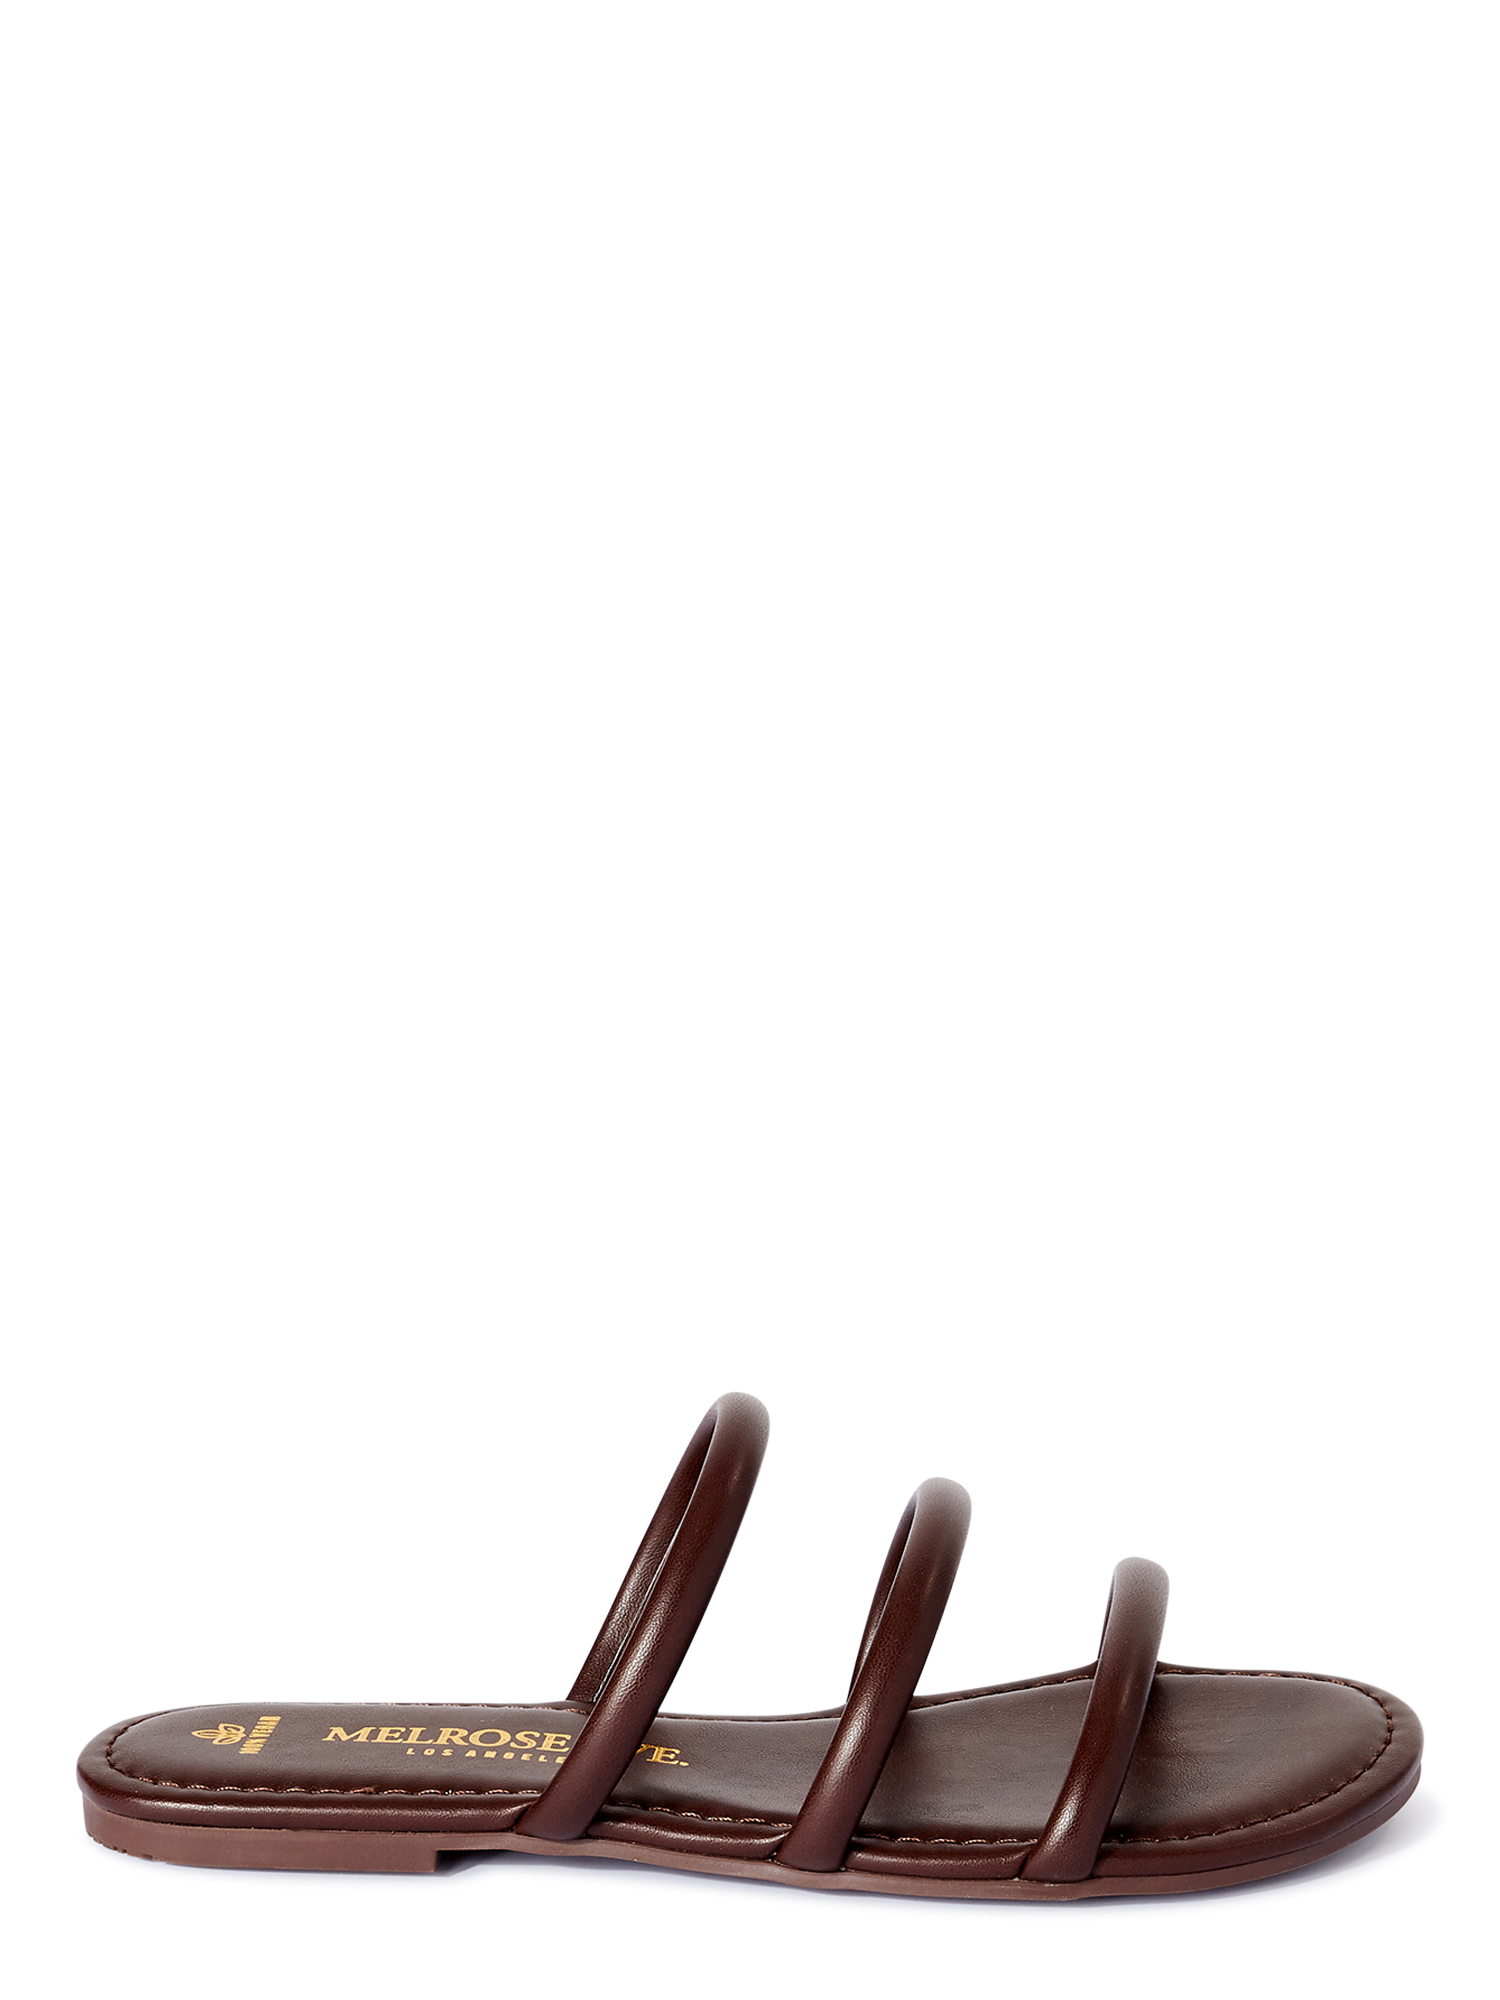 Melrose Ave Women's Faux Leather Three Strap Slide Sandals - image 2 of 6